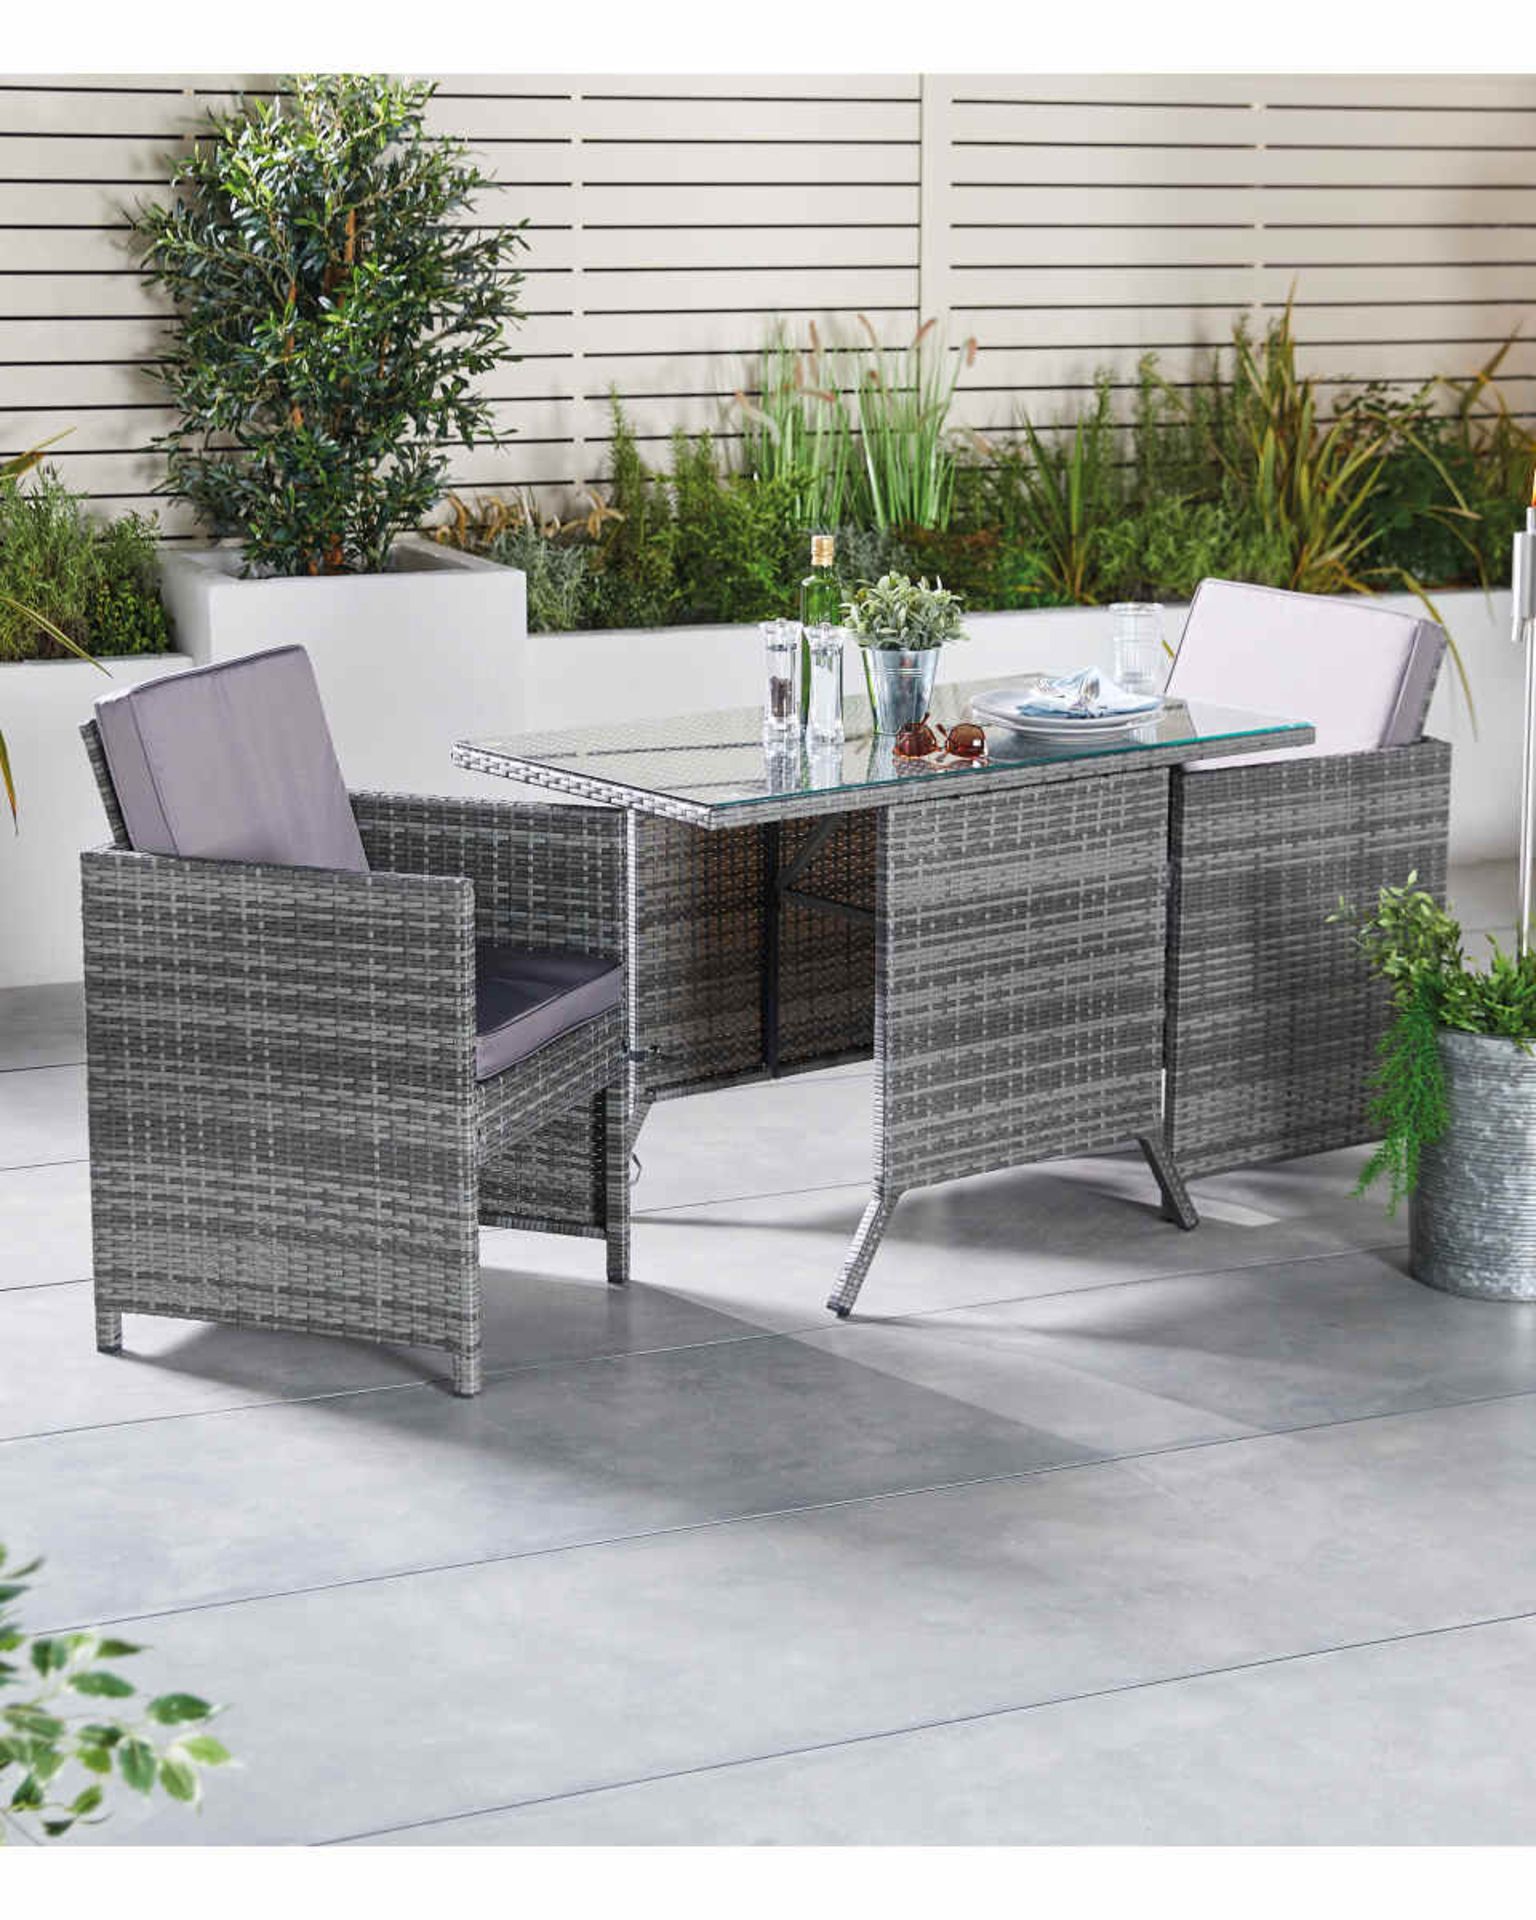 Luxury Compact 3 Piece Bistro Set. Upgrade your outdoor space with this Compact Bistro Set. This - Image 2 of 2